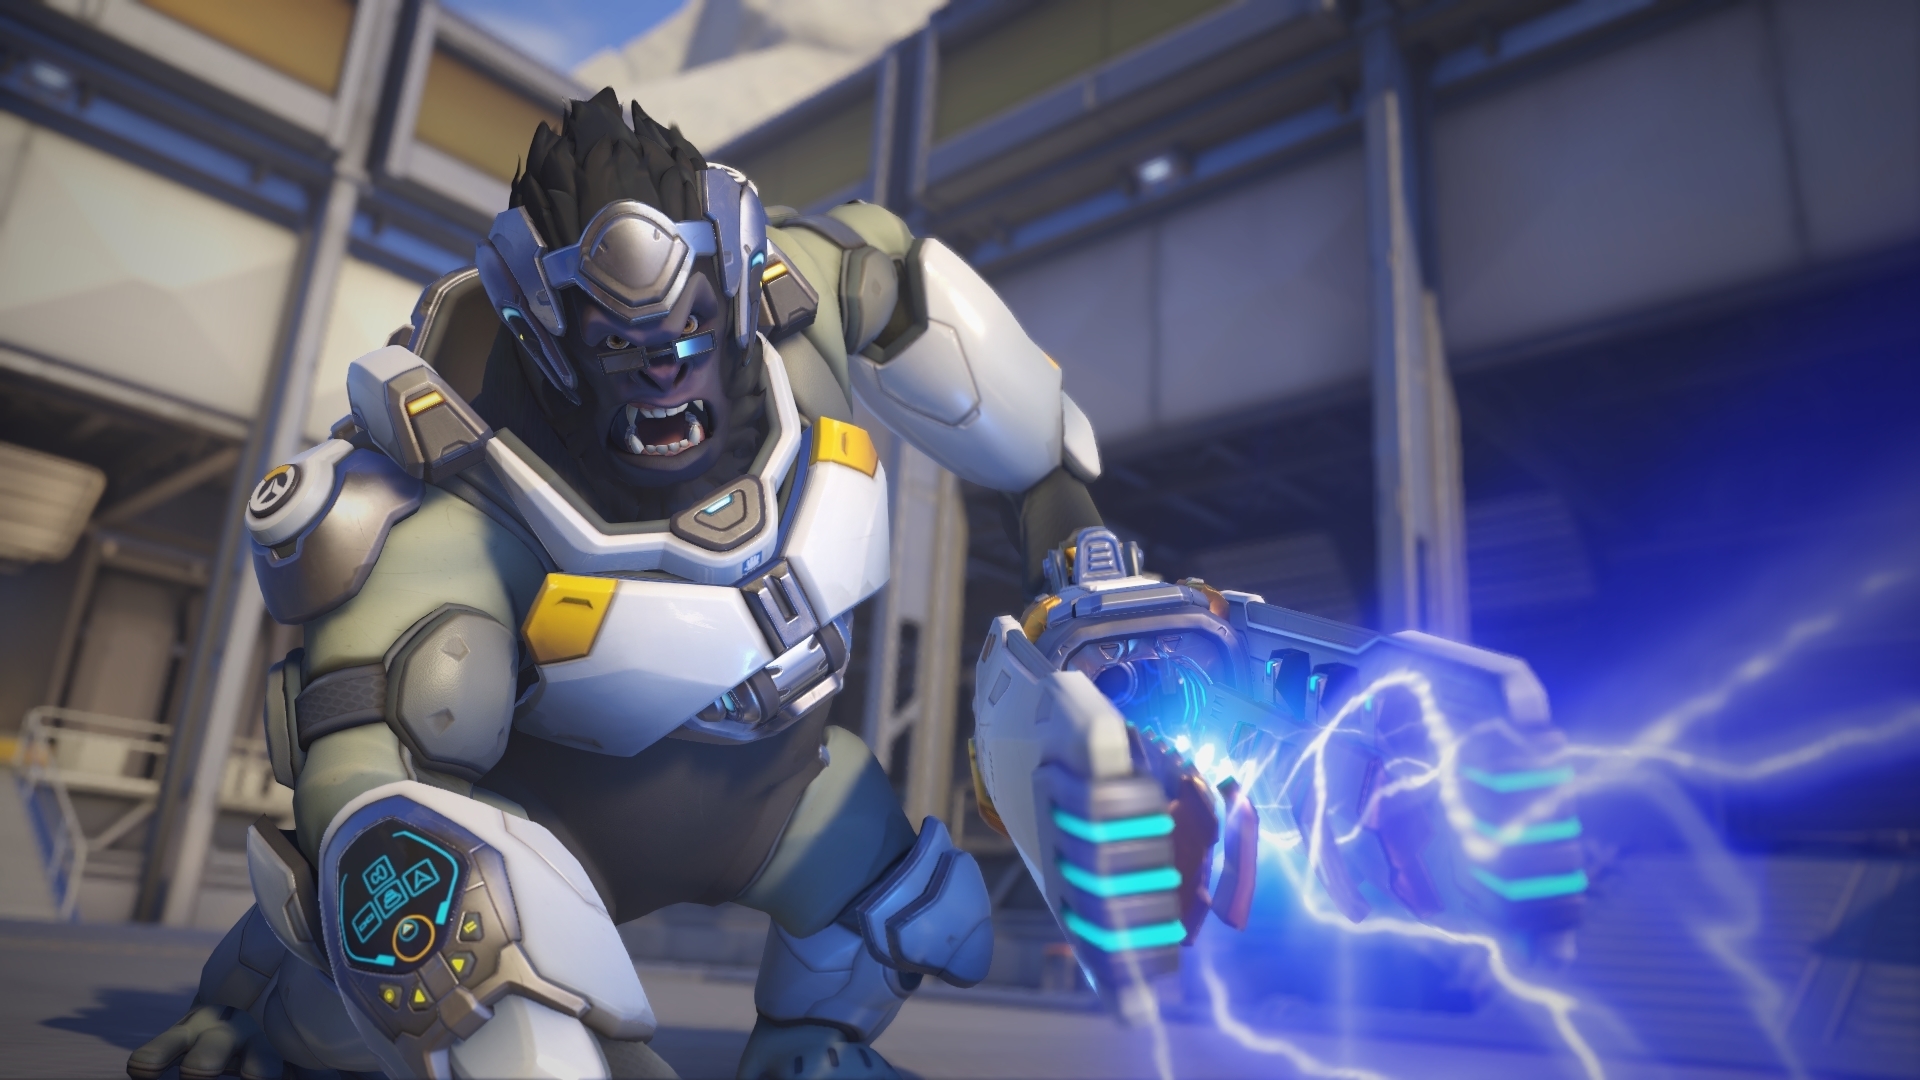 In this article, we are going to be covering how to counter Sombra OW2, so you can play against this elusive offense hero and win matches.